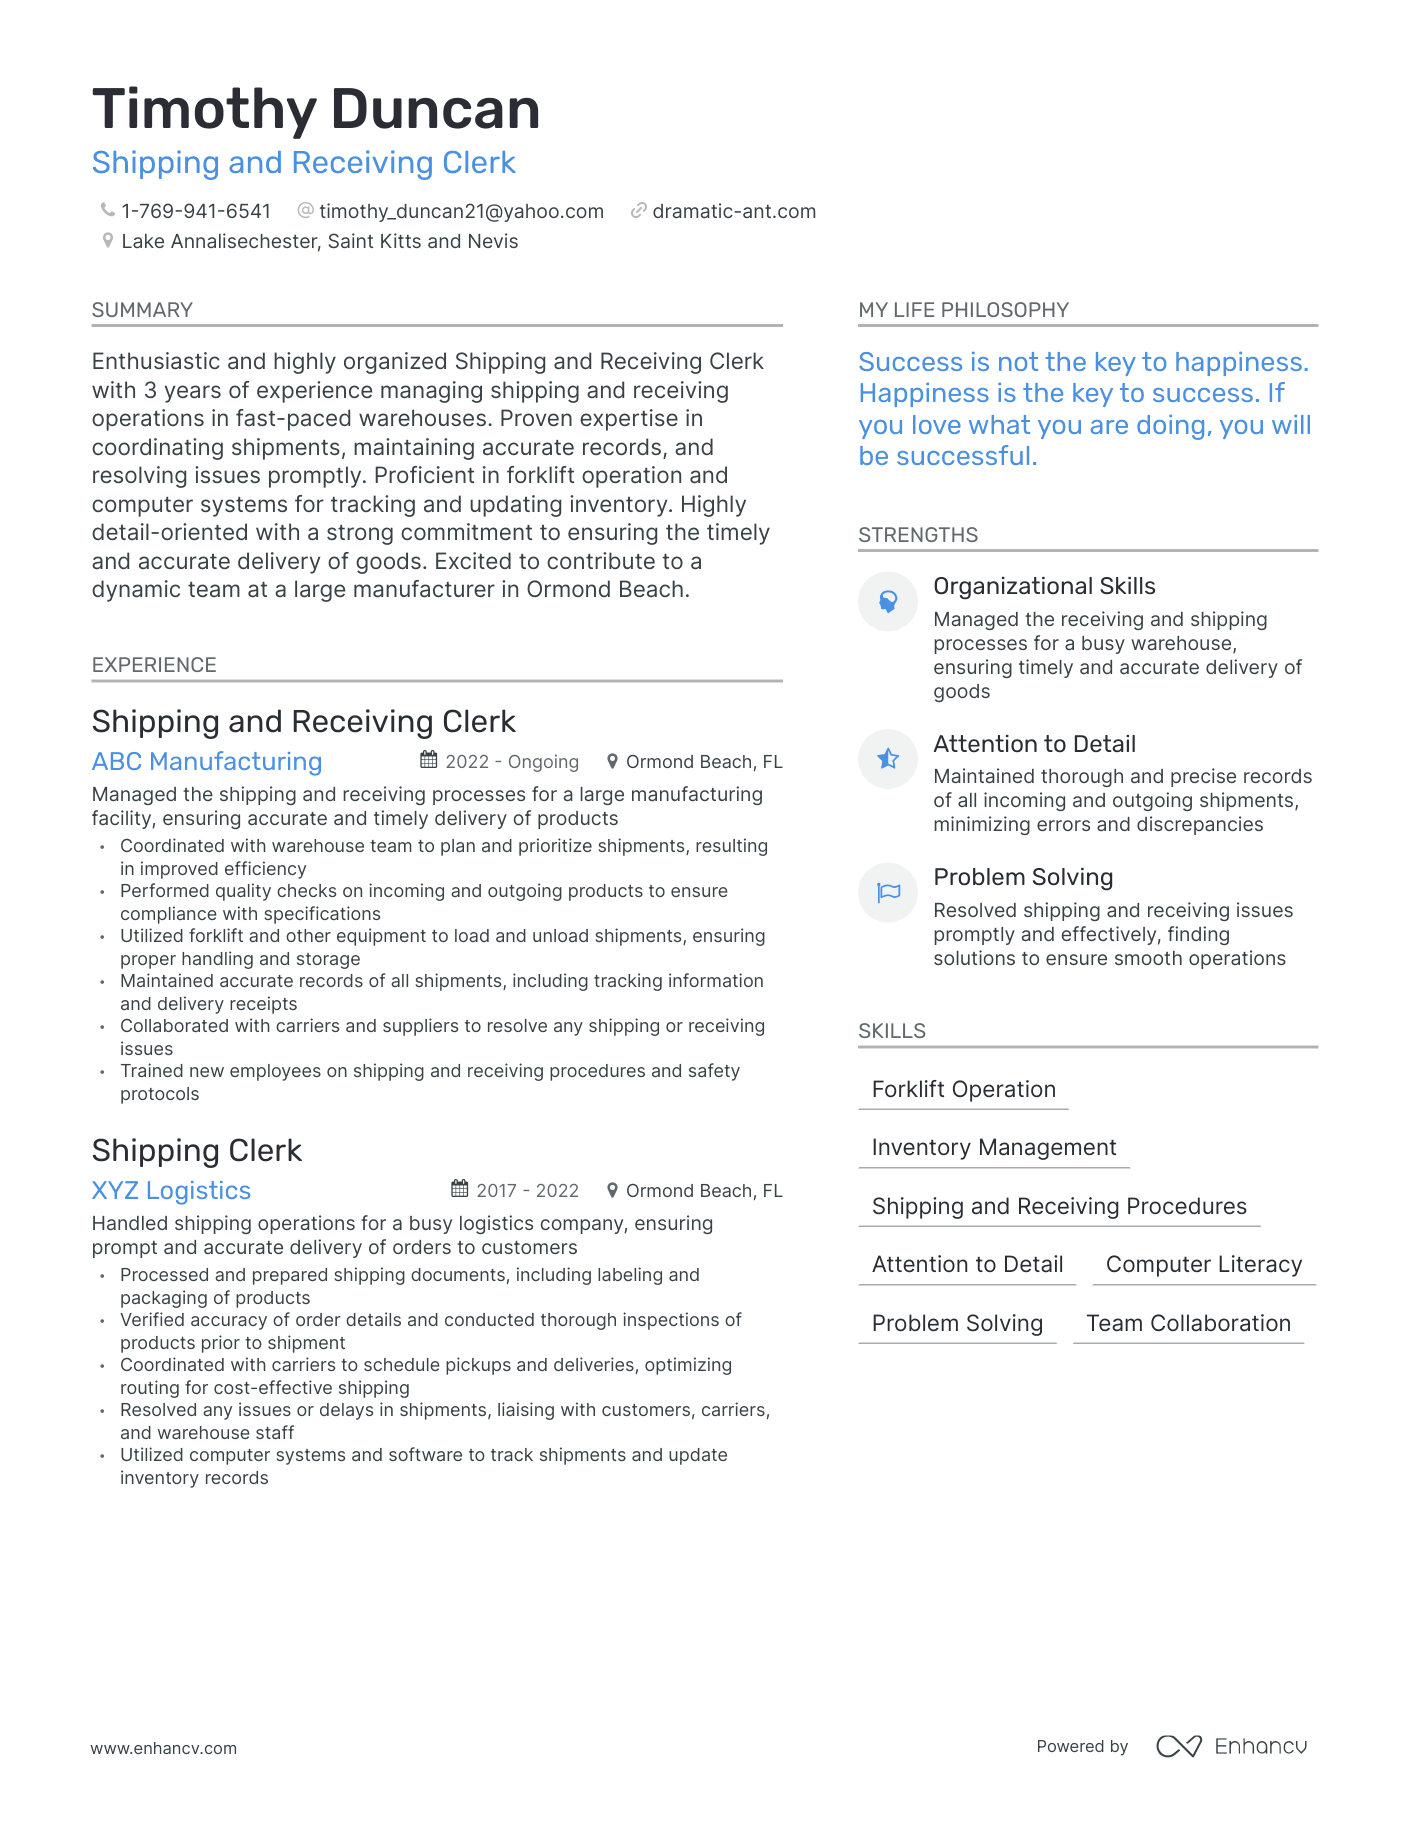 Shipping and Receiving Clerk resume example